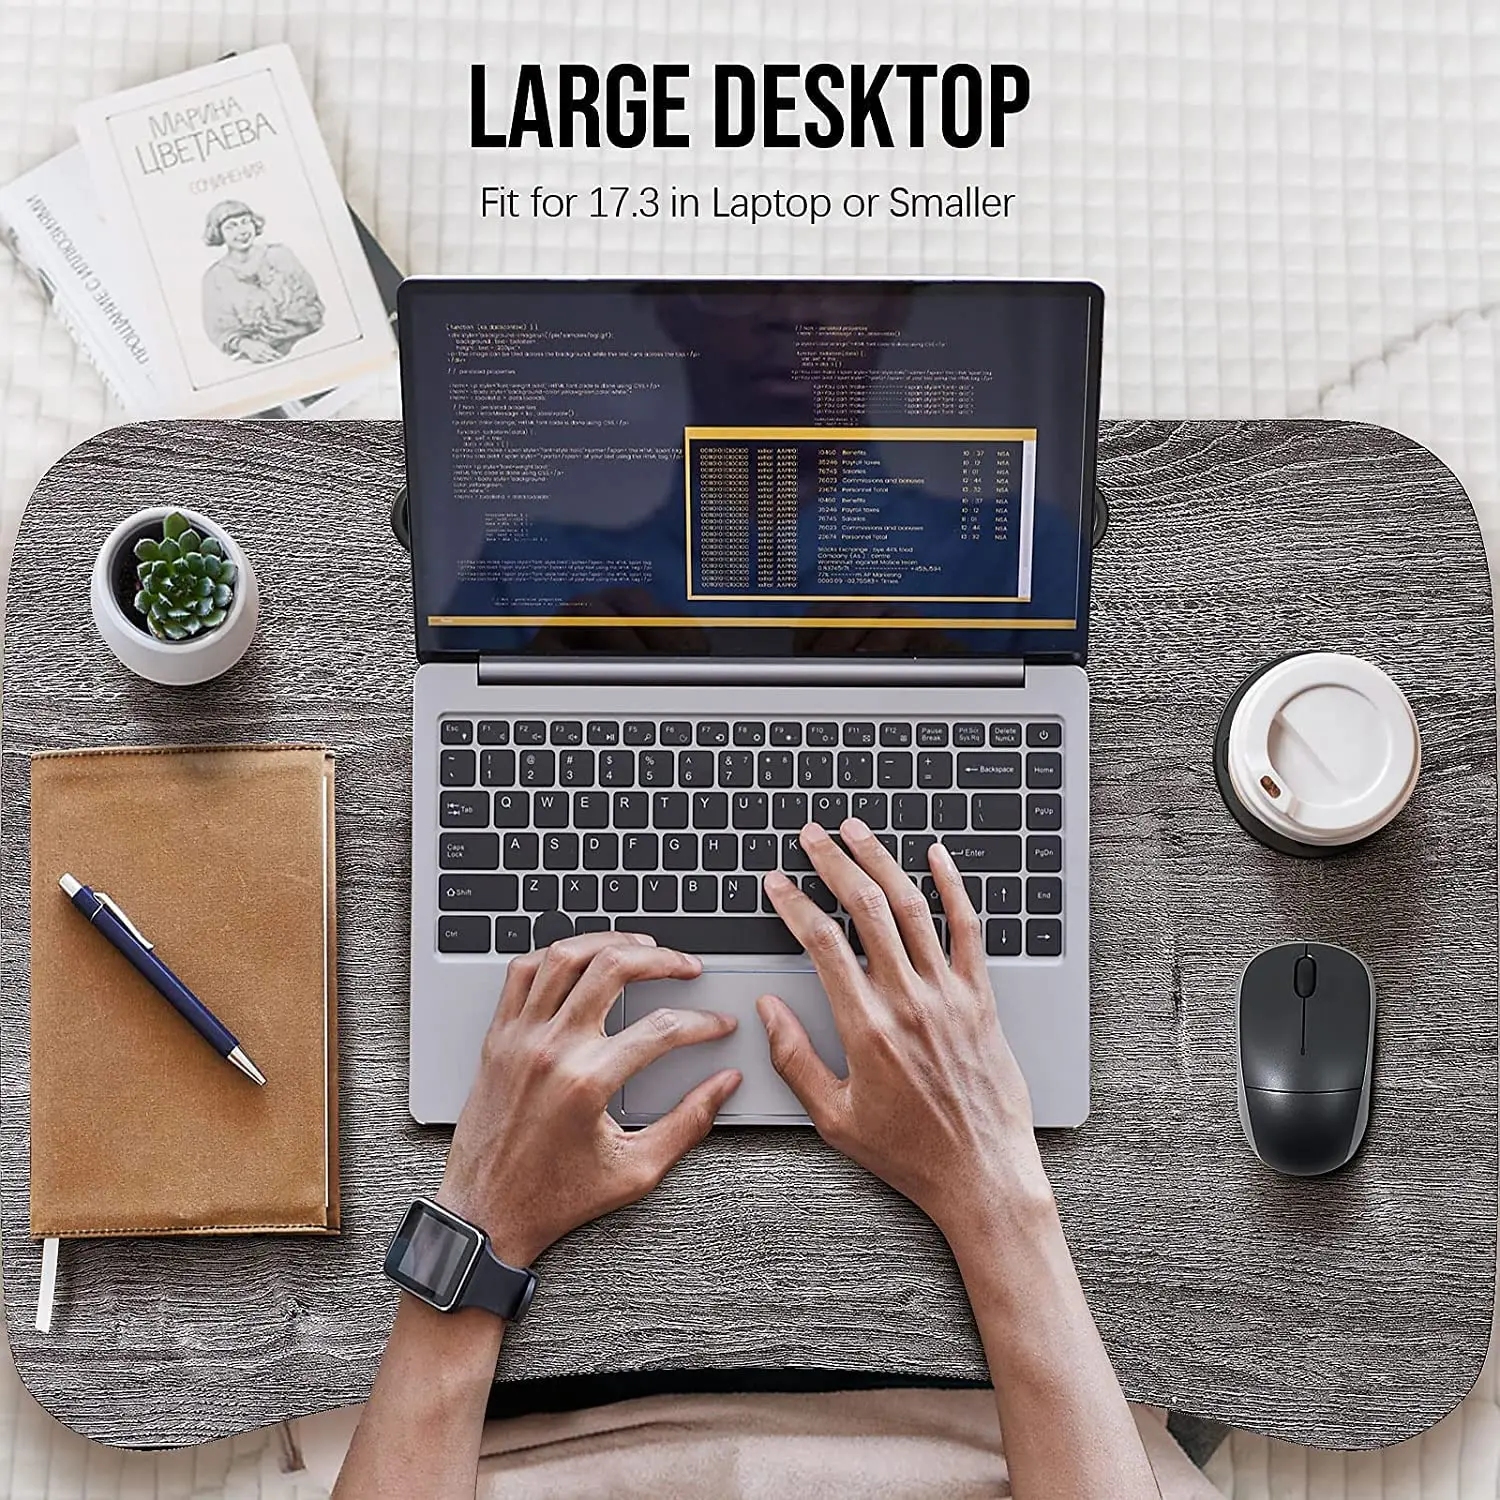  Laptop Bed Desk Lap Tray: Large Portable Foldable laptray  Computer bedtray Table for Writing Reading Eating Breakfast XXL lapdesk on  Low Sitting Floor or Adult Laying Couch : Office Products